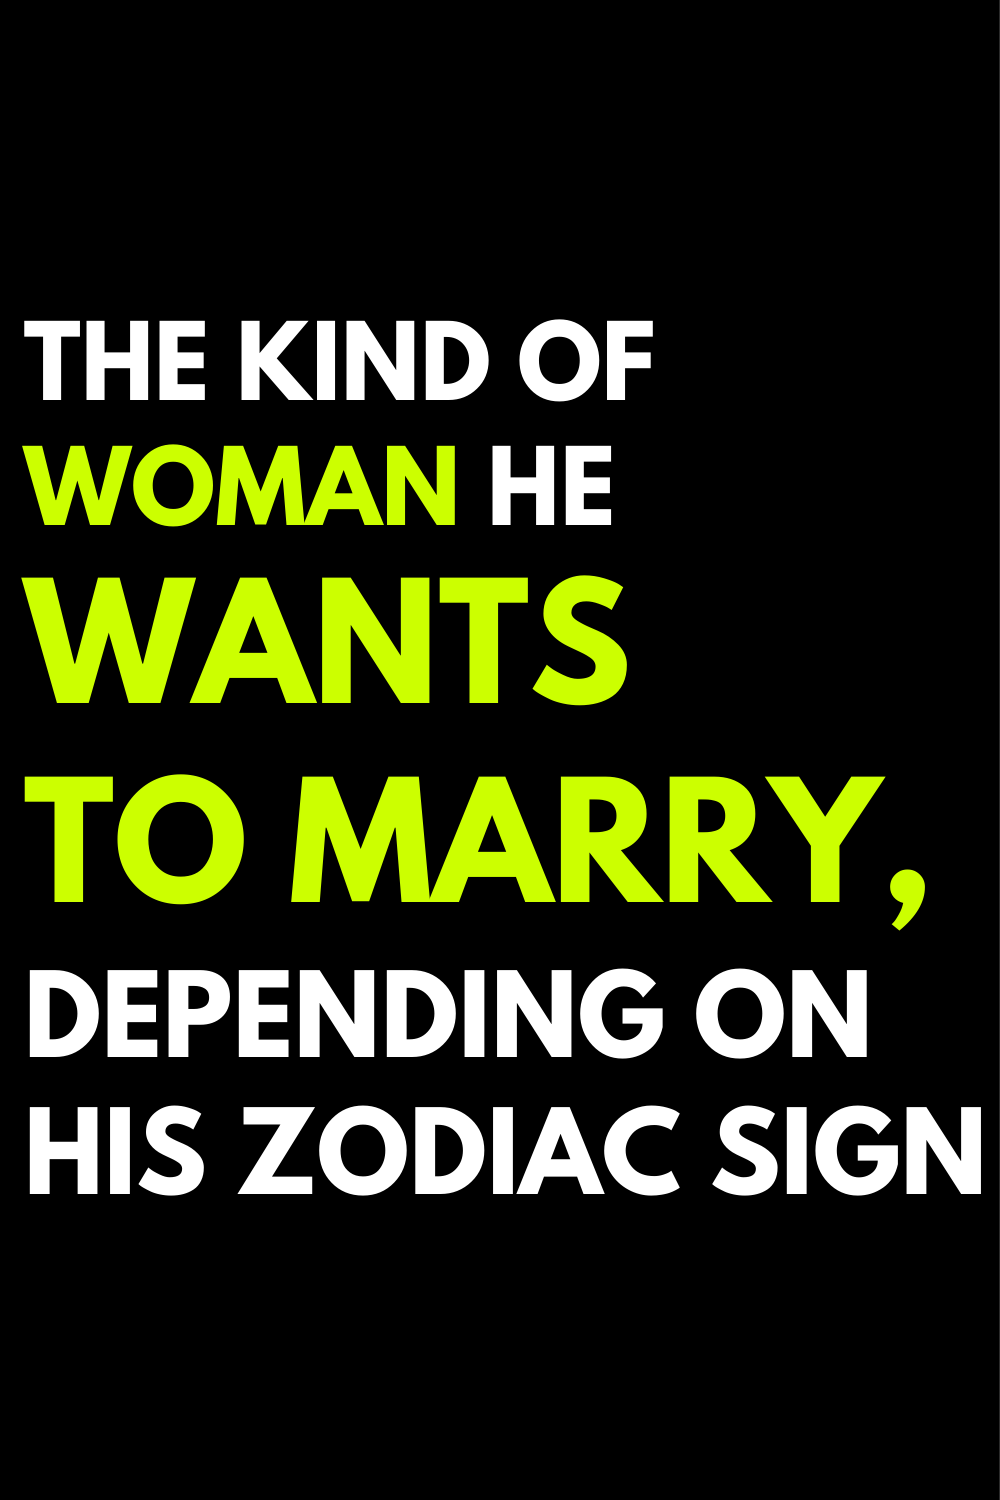 The kind of woman he wants to marry, depending on his zodiac sign